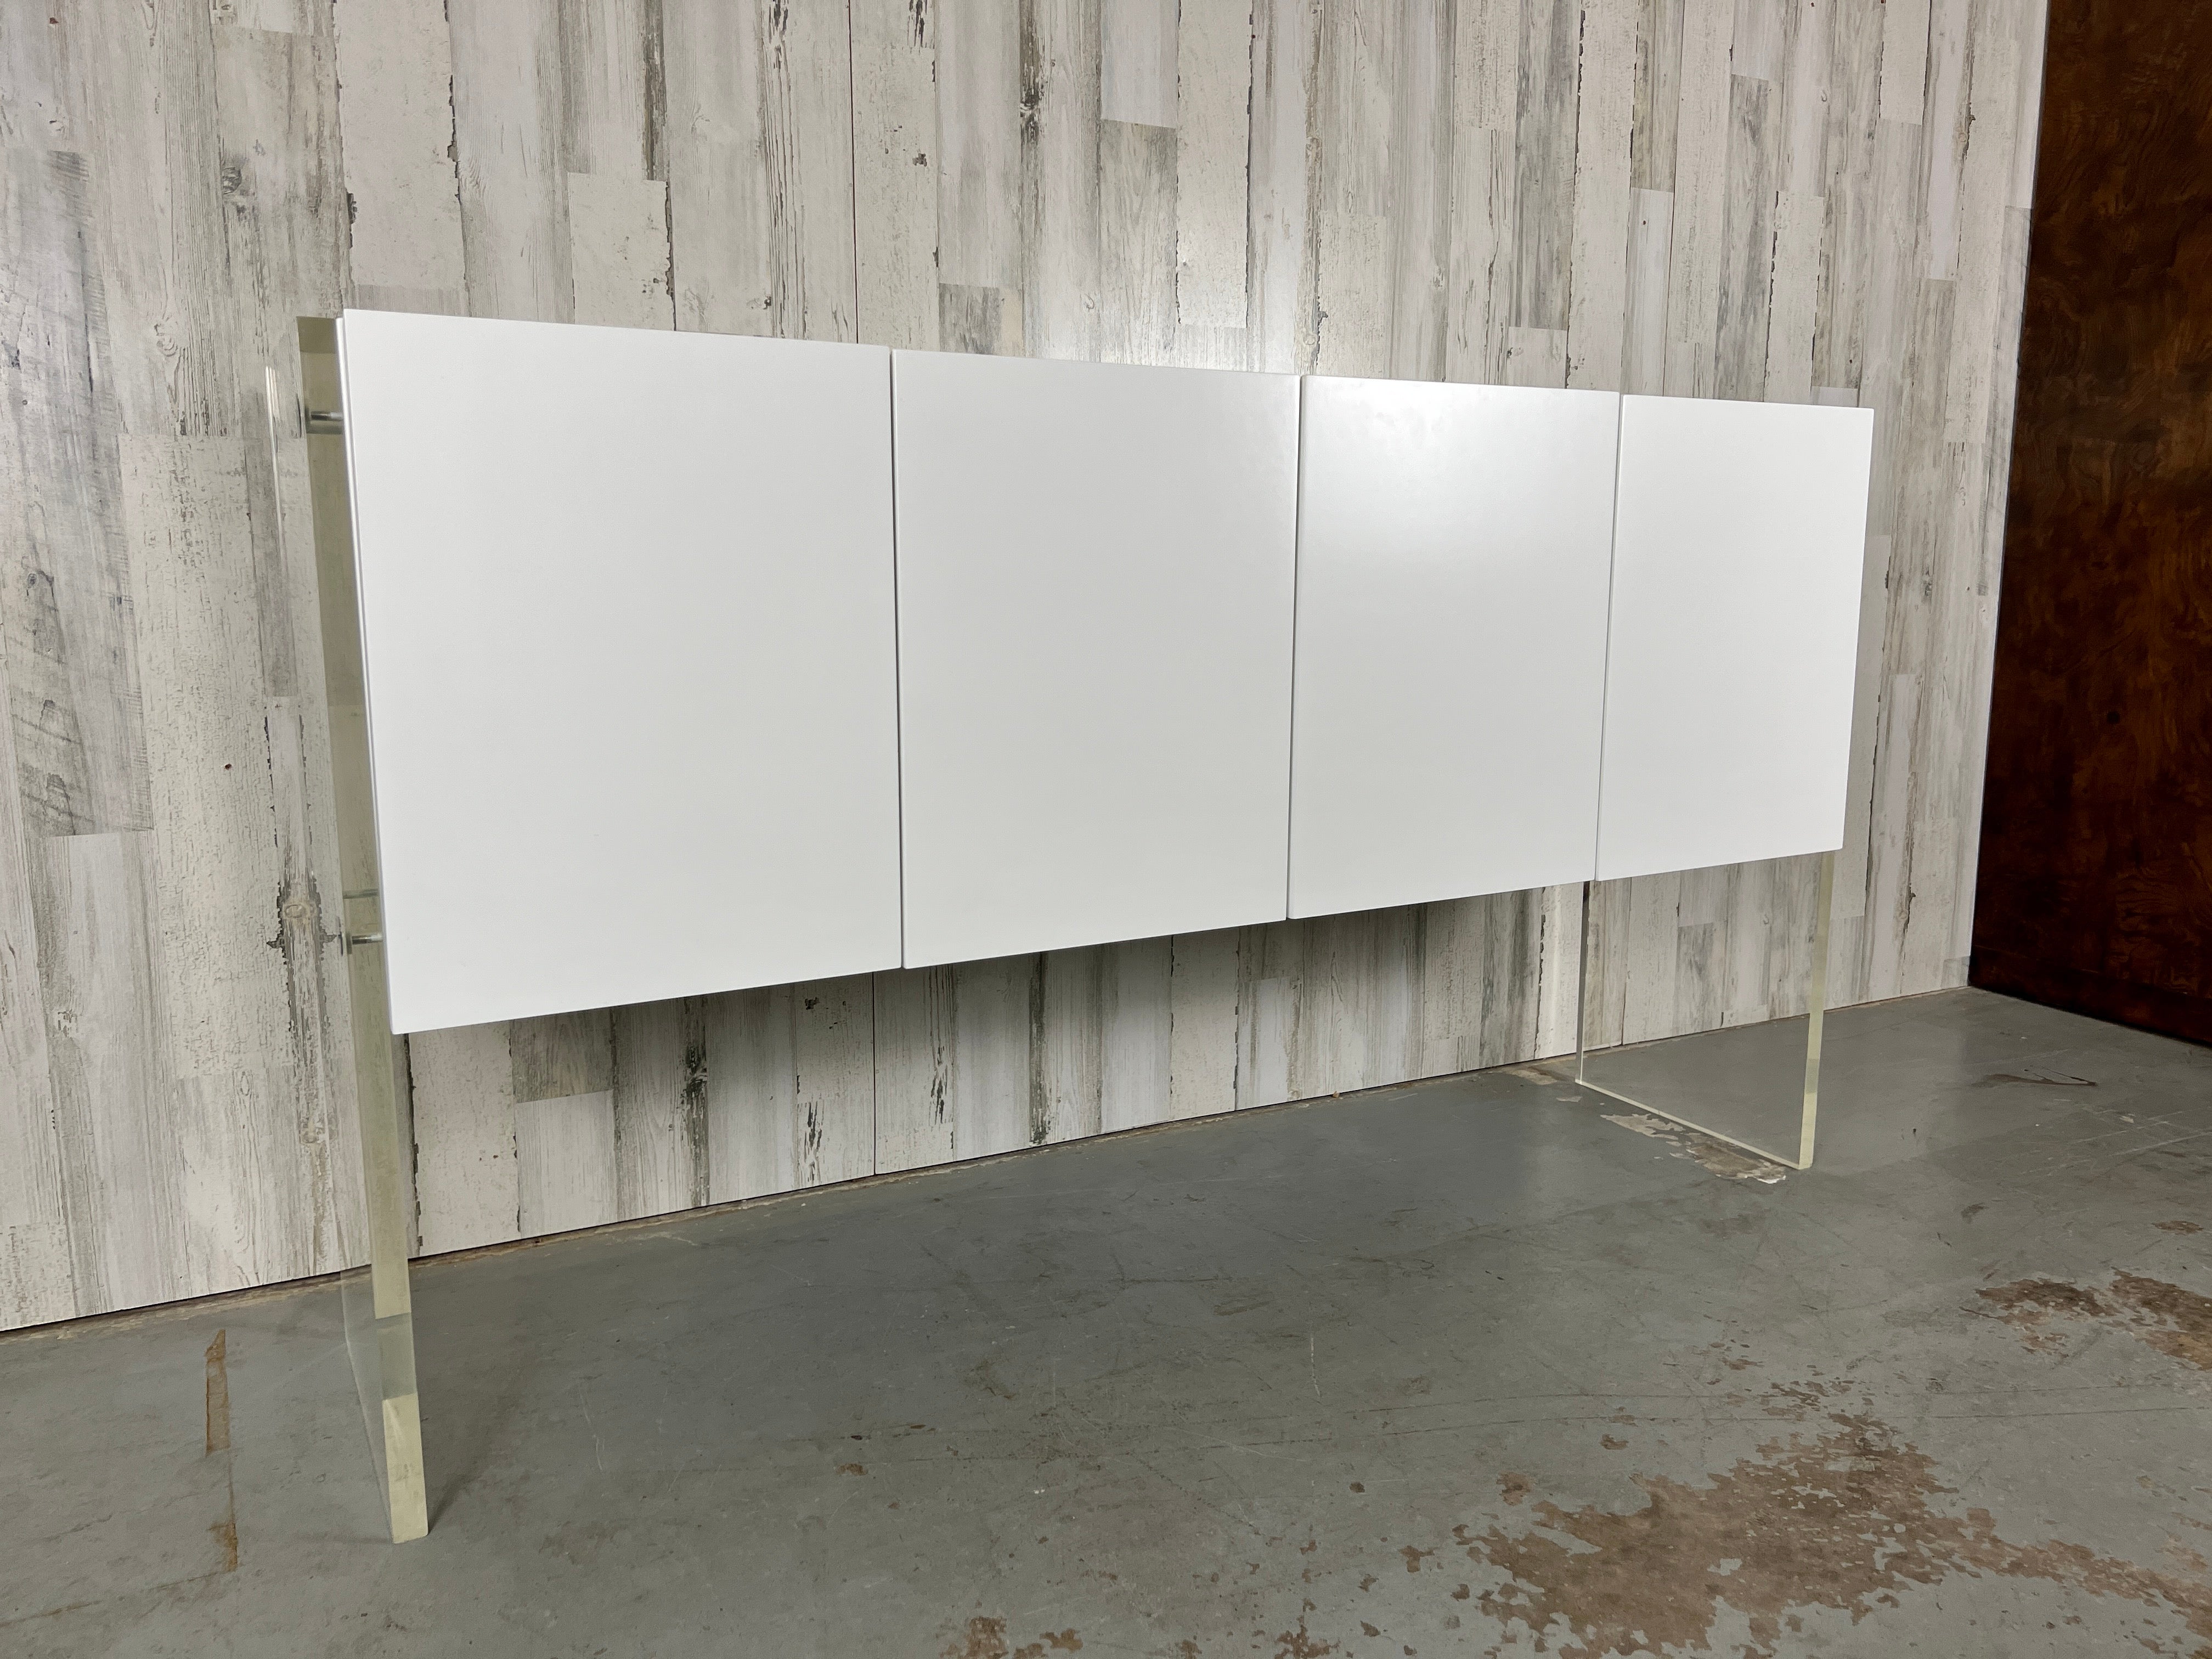 Milo Baughman for Thayer Coggin Lacquer and Lucite credenza. Refinished in pure satin white lacquer, held up by transparent lucite legs that create a floating illusion.